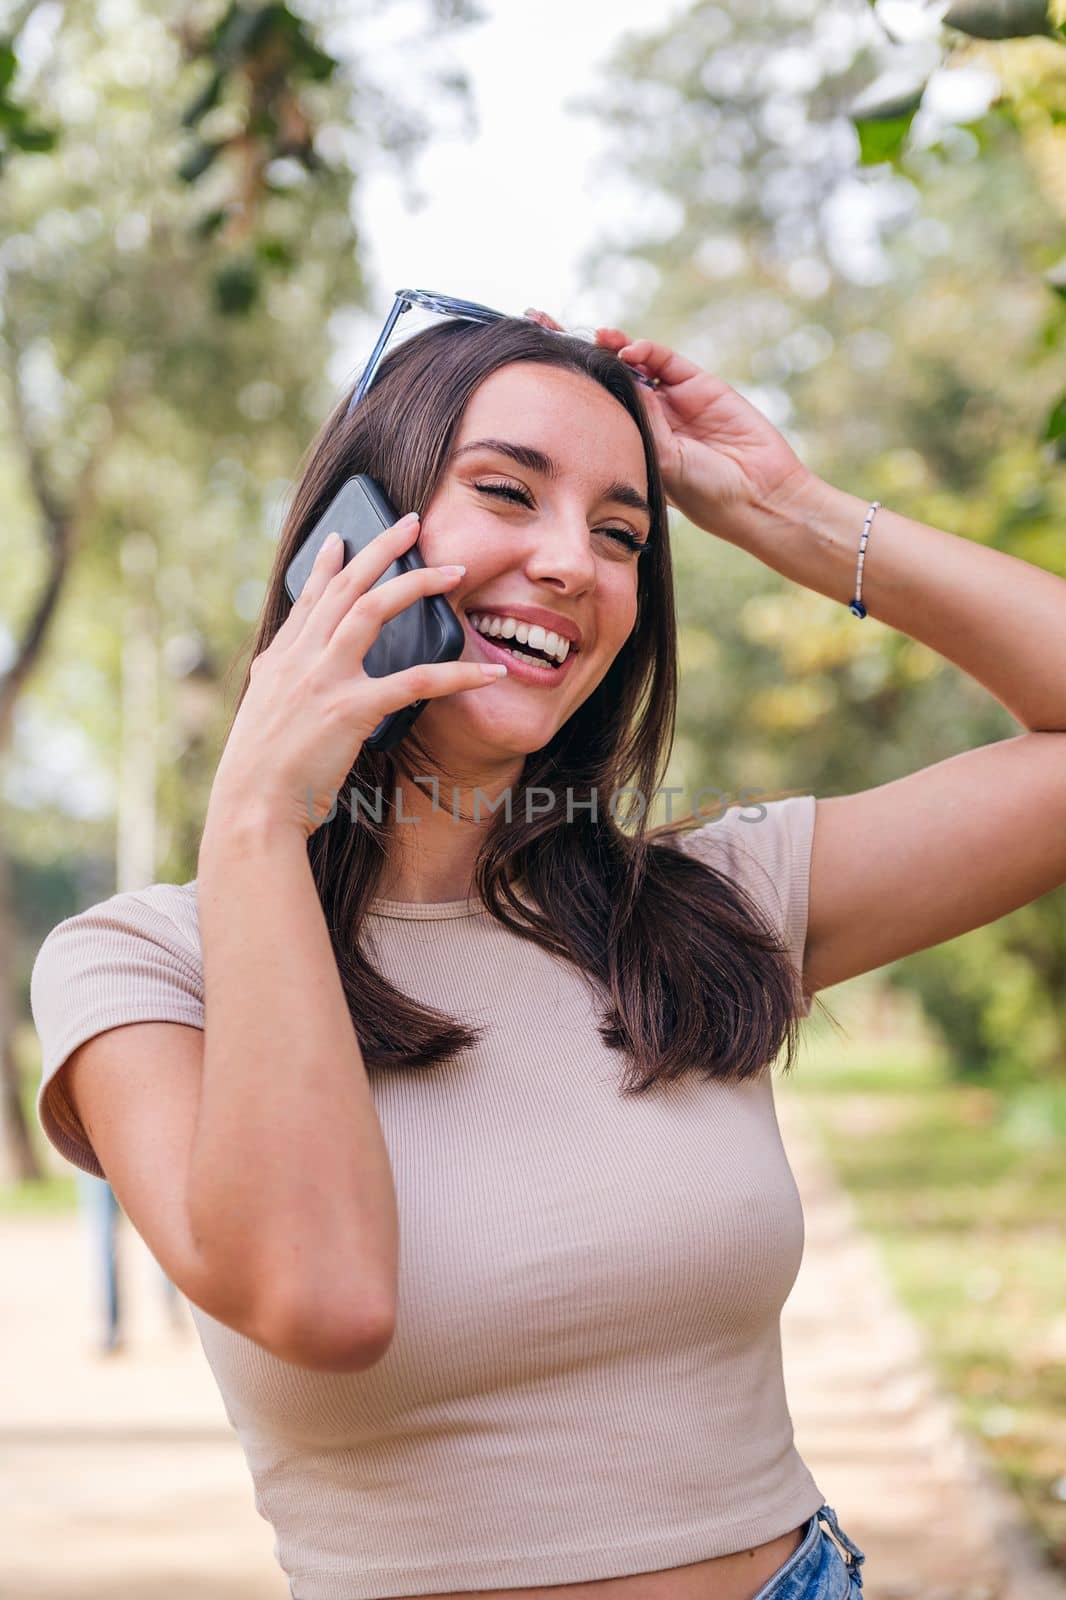 young woman smiling during a call with her phone by raulmelldo